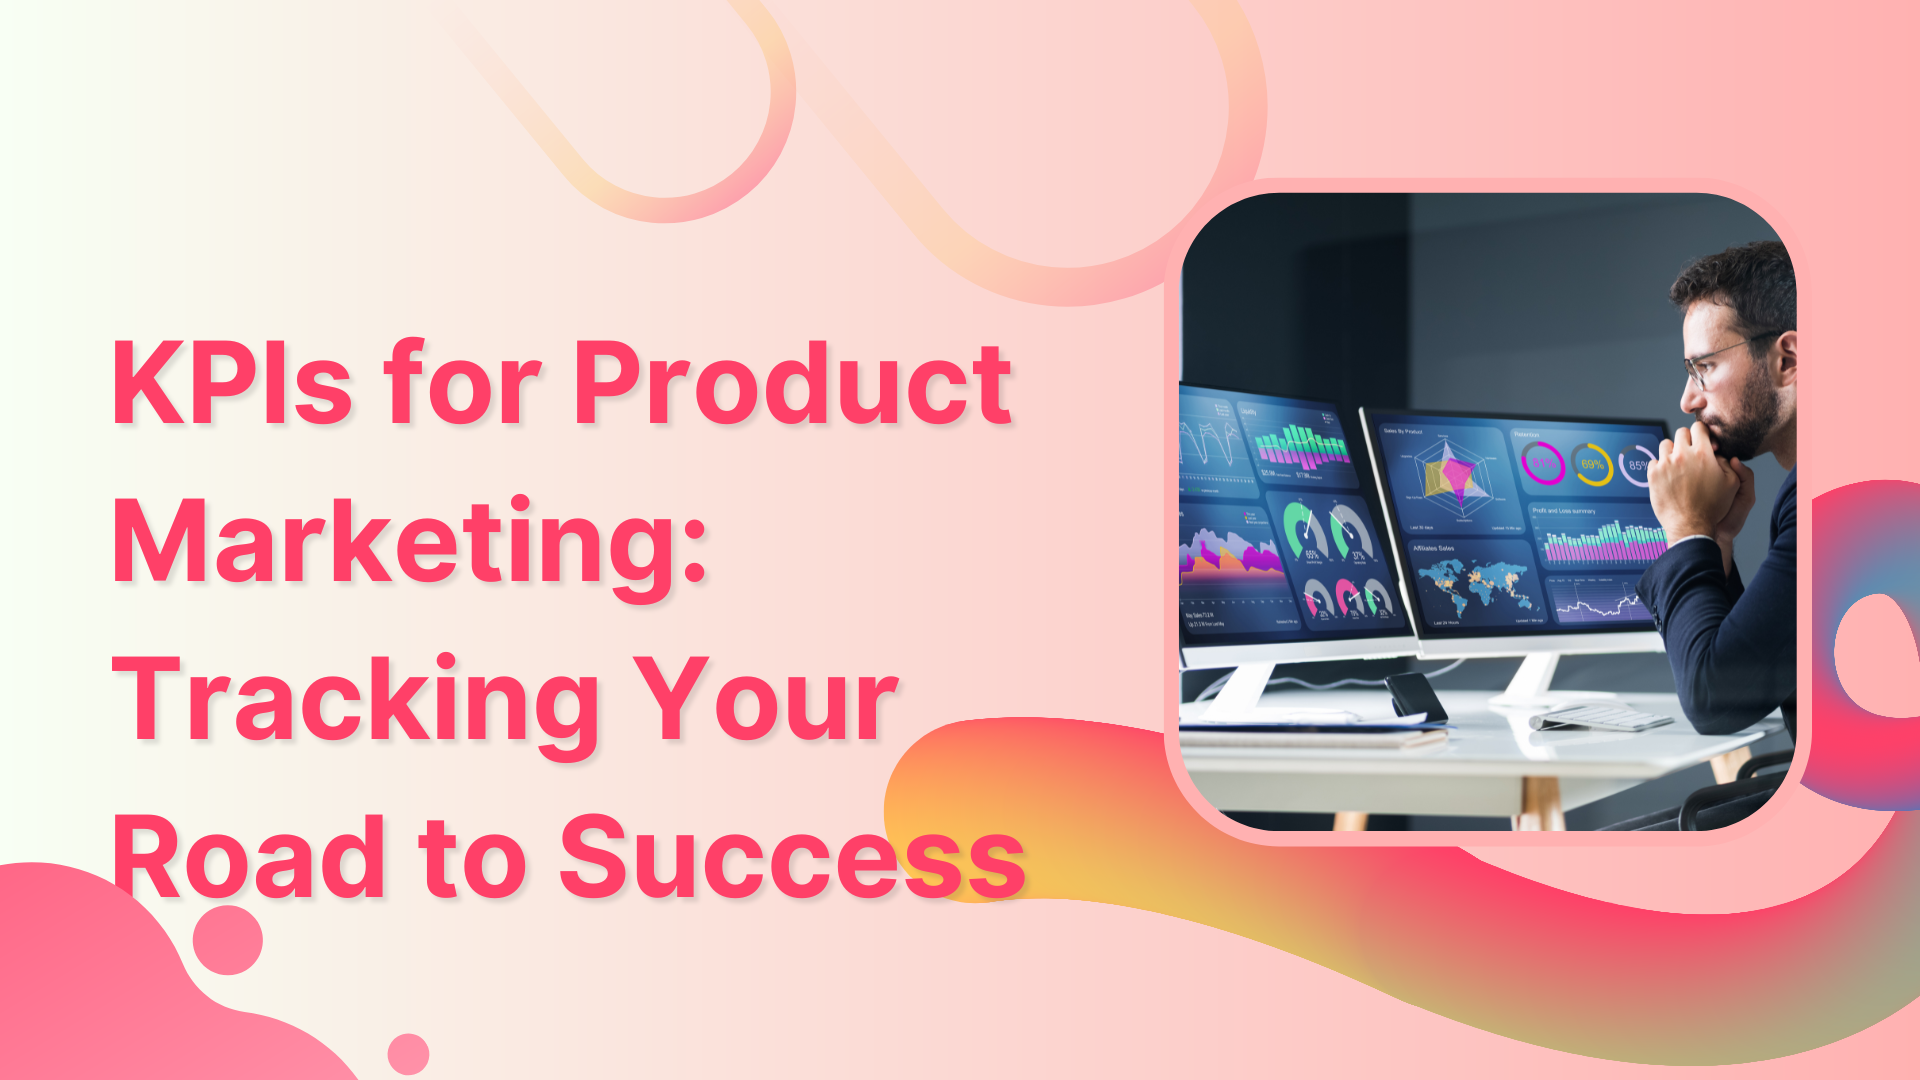 KPIs for Product Marketing: Tracking Your Road to Success